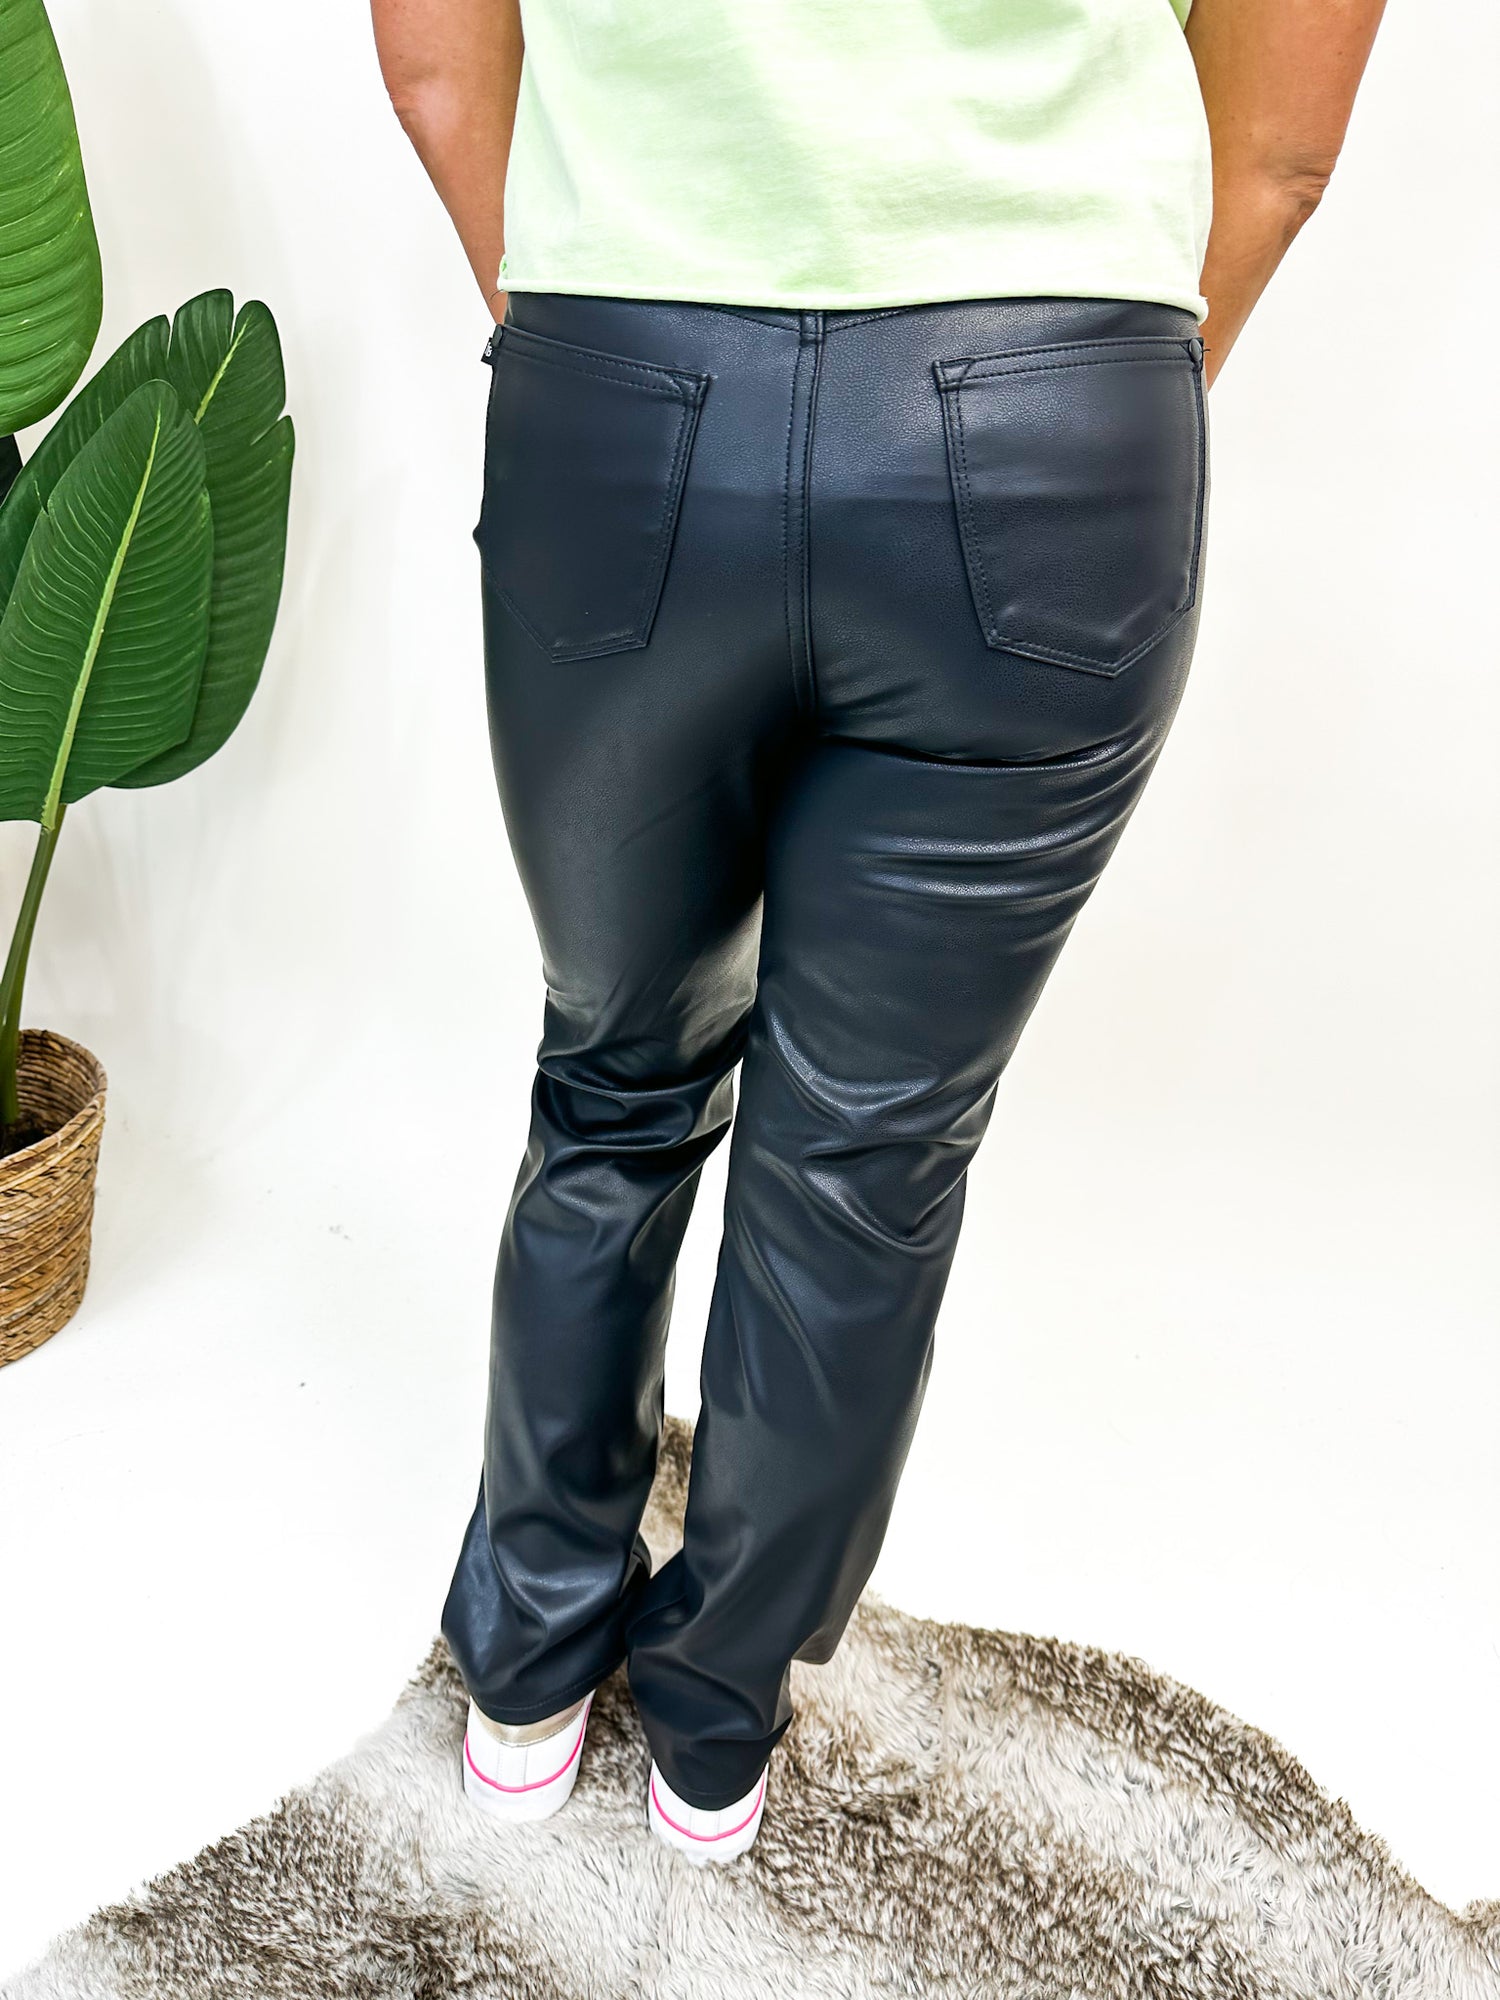 Women's Leather Pants, Judy Black Leather Trousers